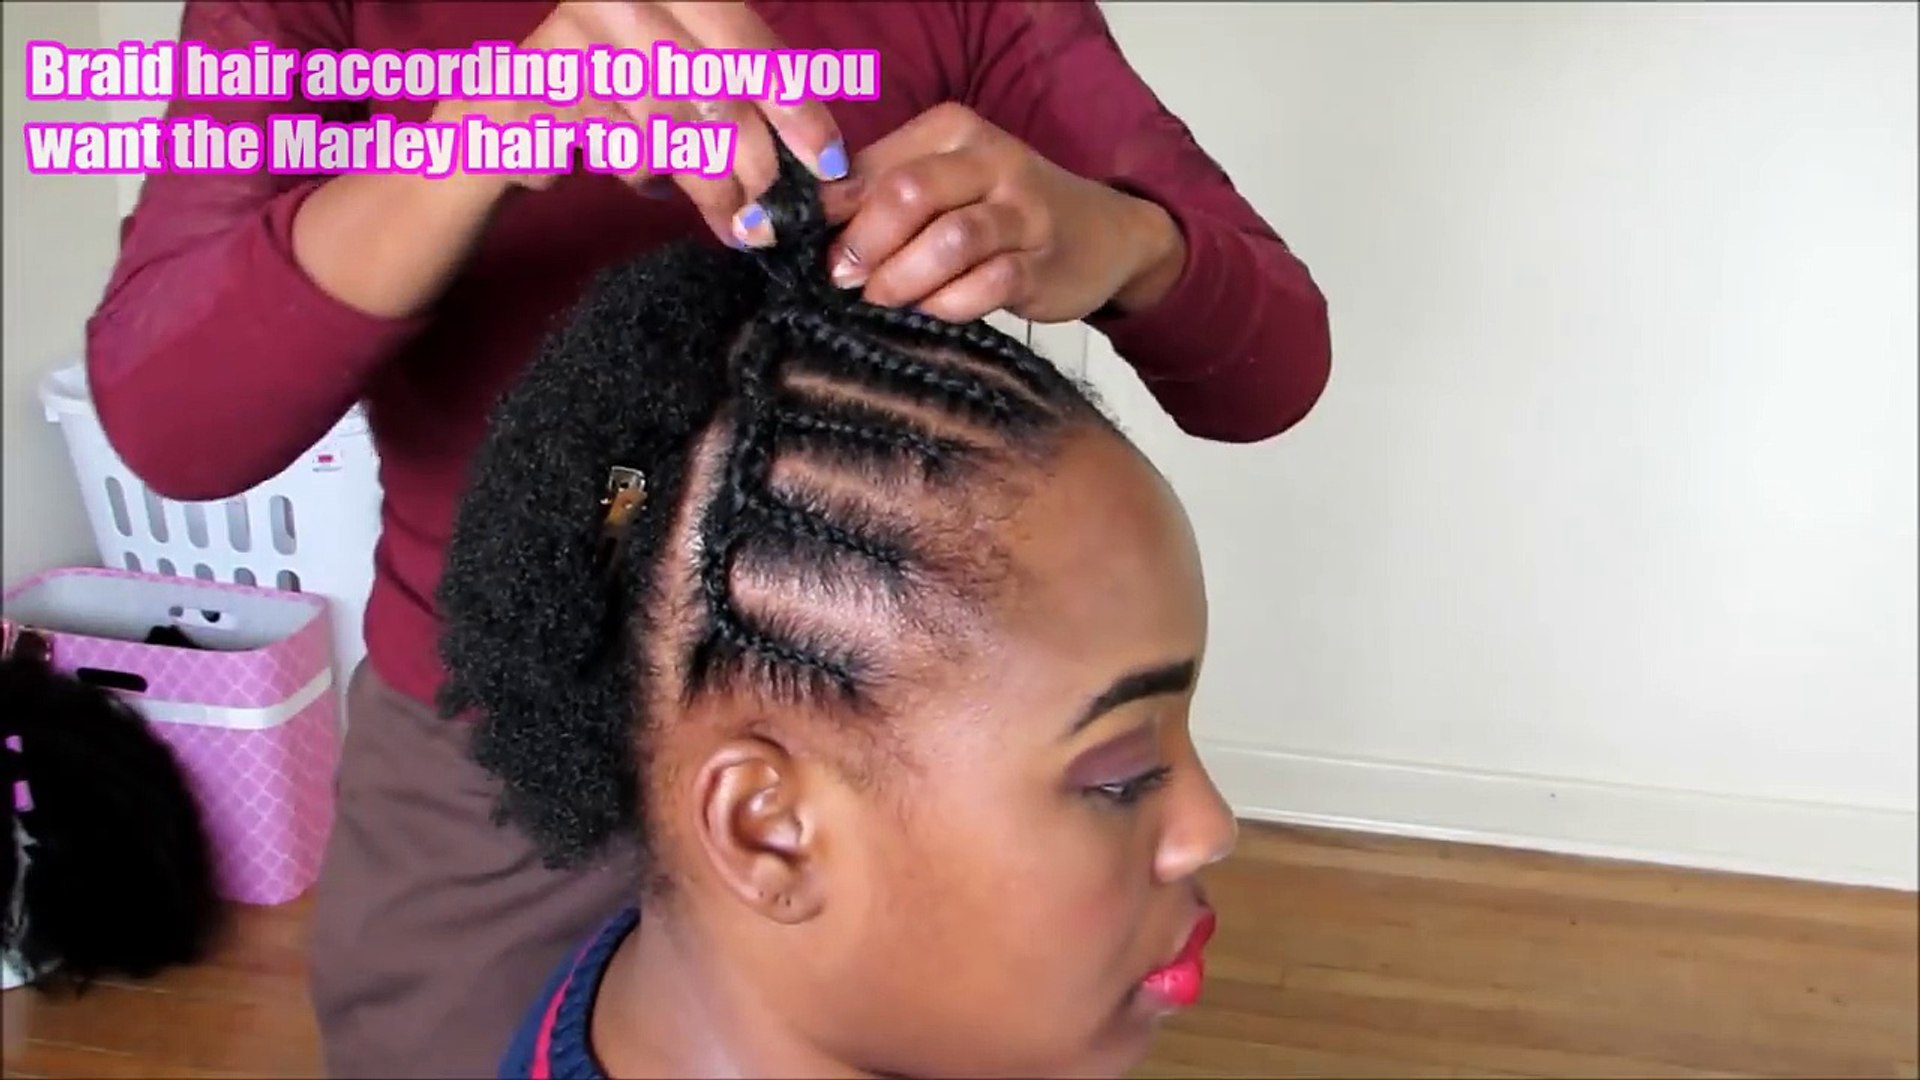 Crochet Braid Pattern For Natural Hair Styles Tutorial Part 2 of 6